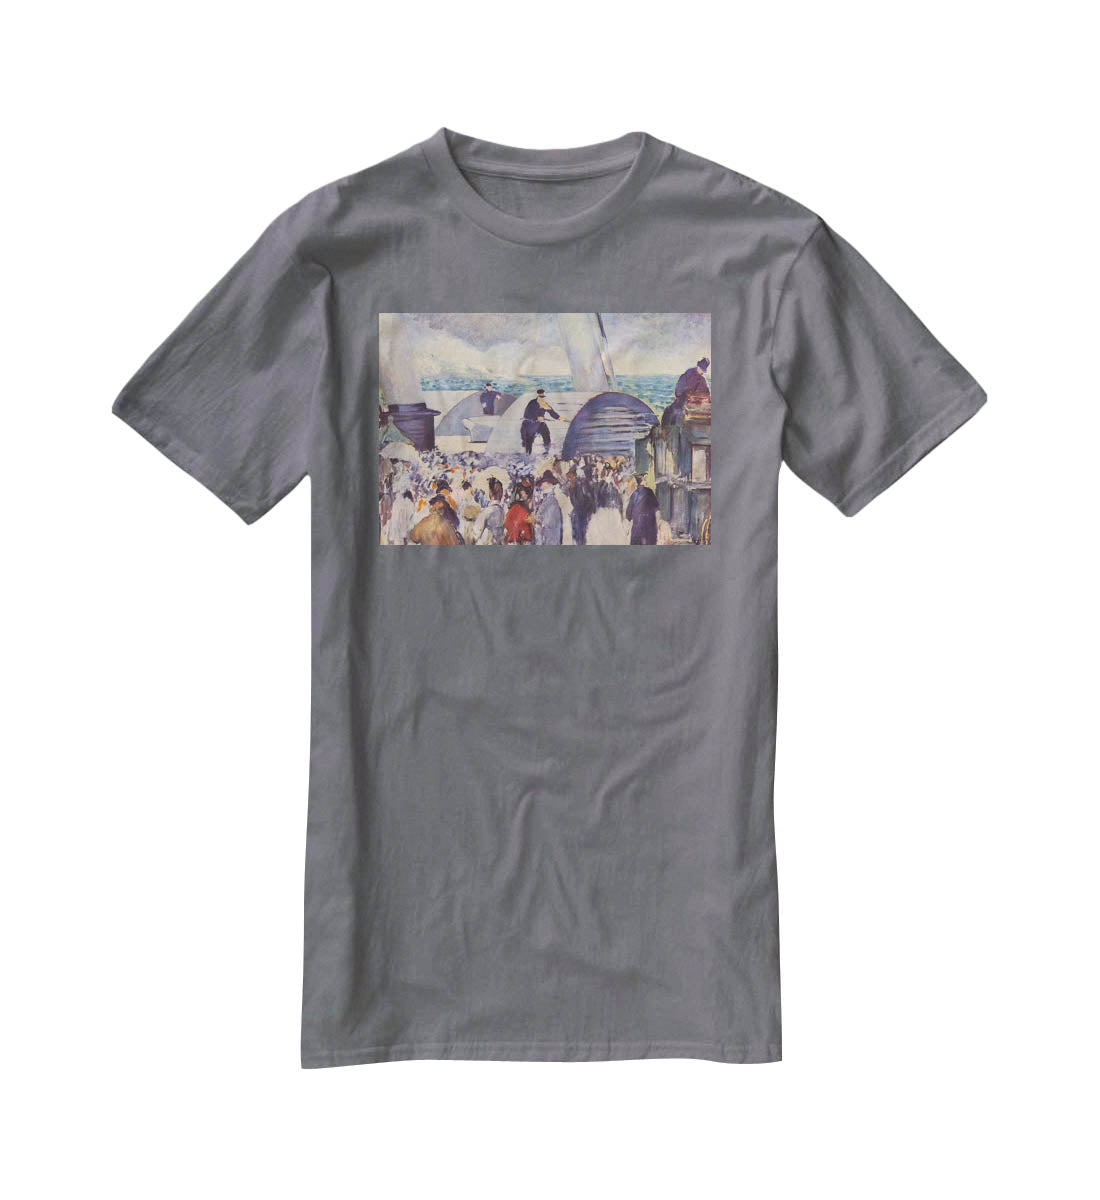 Embarkation after Folkestone by Manet T-Shirt - Canvas Art Rocks - 3